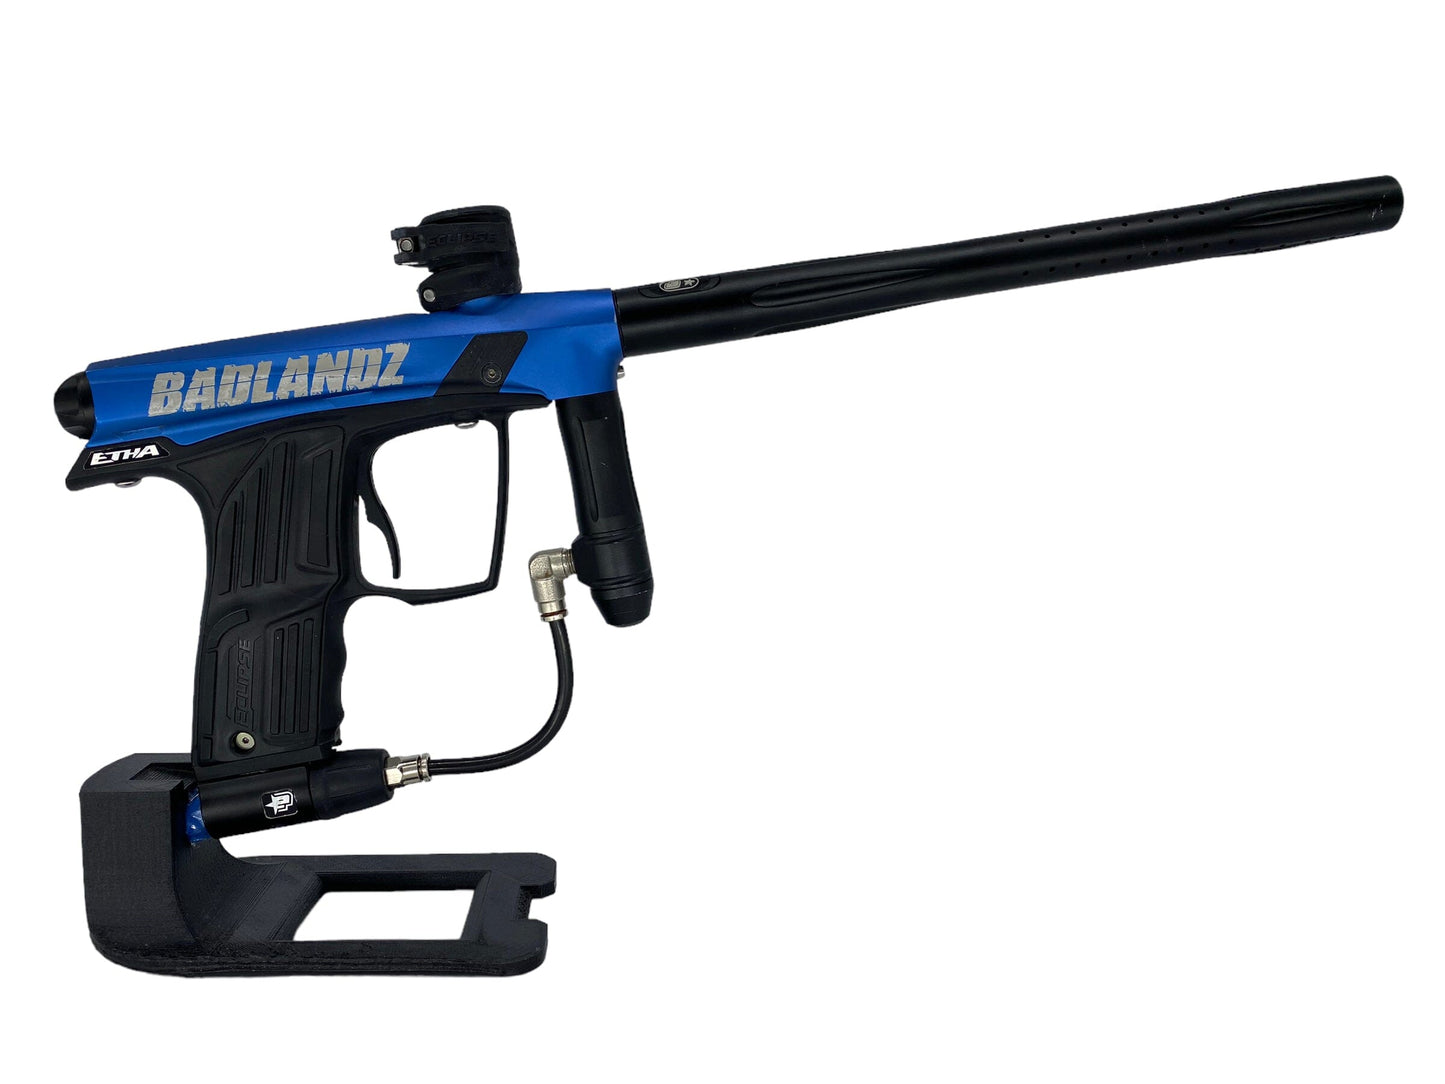 Used Planet Eclipse Etha Paintball Gun from CPXBrosPaintball Buy/Sell/Trade Paintball Markers, Paintball Hoppers, Paintball Masks, and Hormesis Headbands